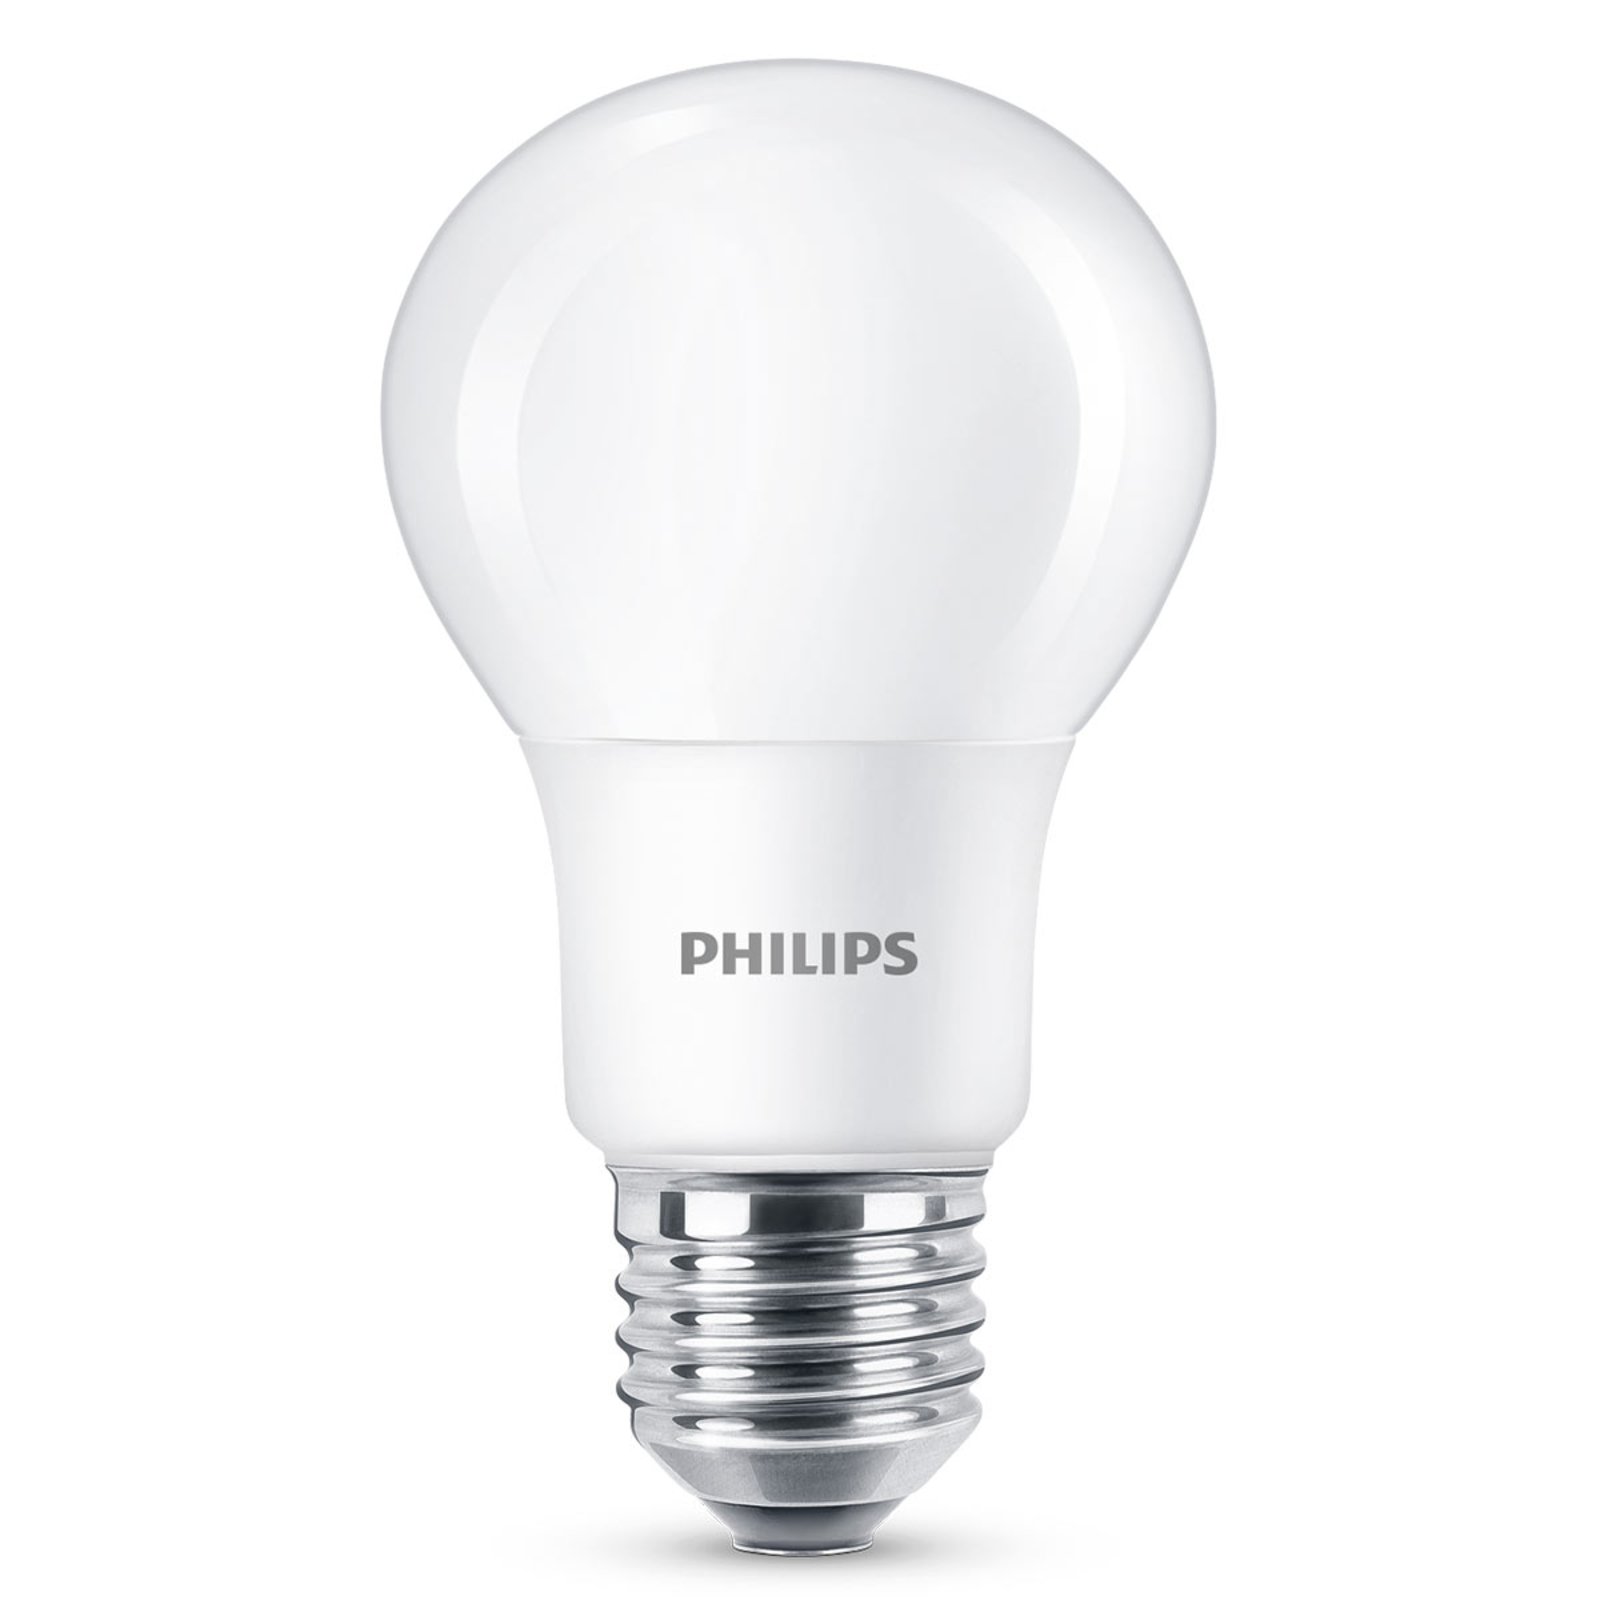 Philips E27 LED 2,2 W blanc chaud, non dimmable